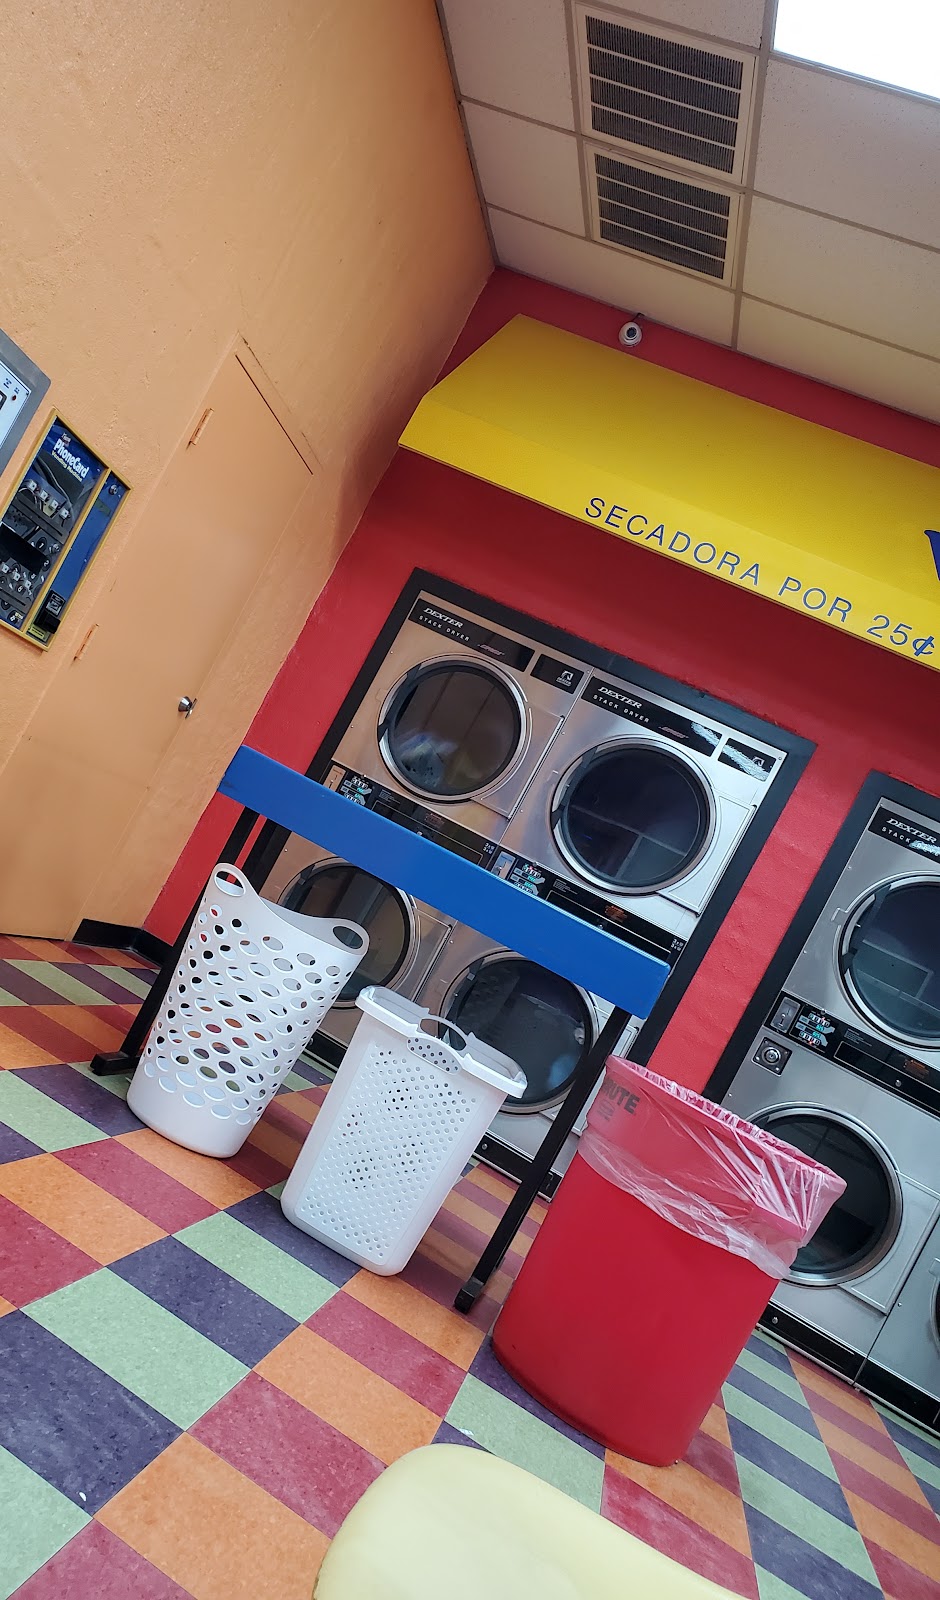 What-A-Wash Laundry | 901 E 3rd St, Siler City, NC 27344, USA | Phone: (919) 663-2034